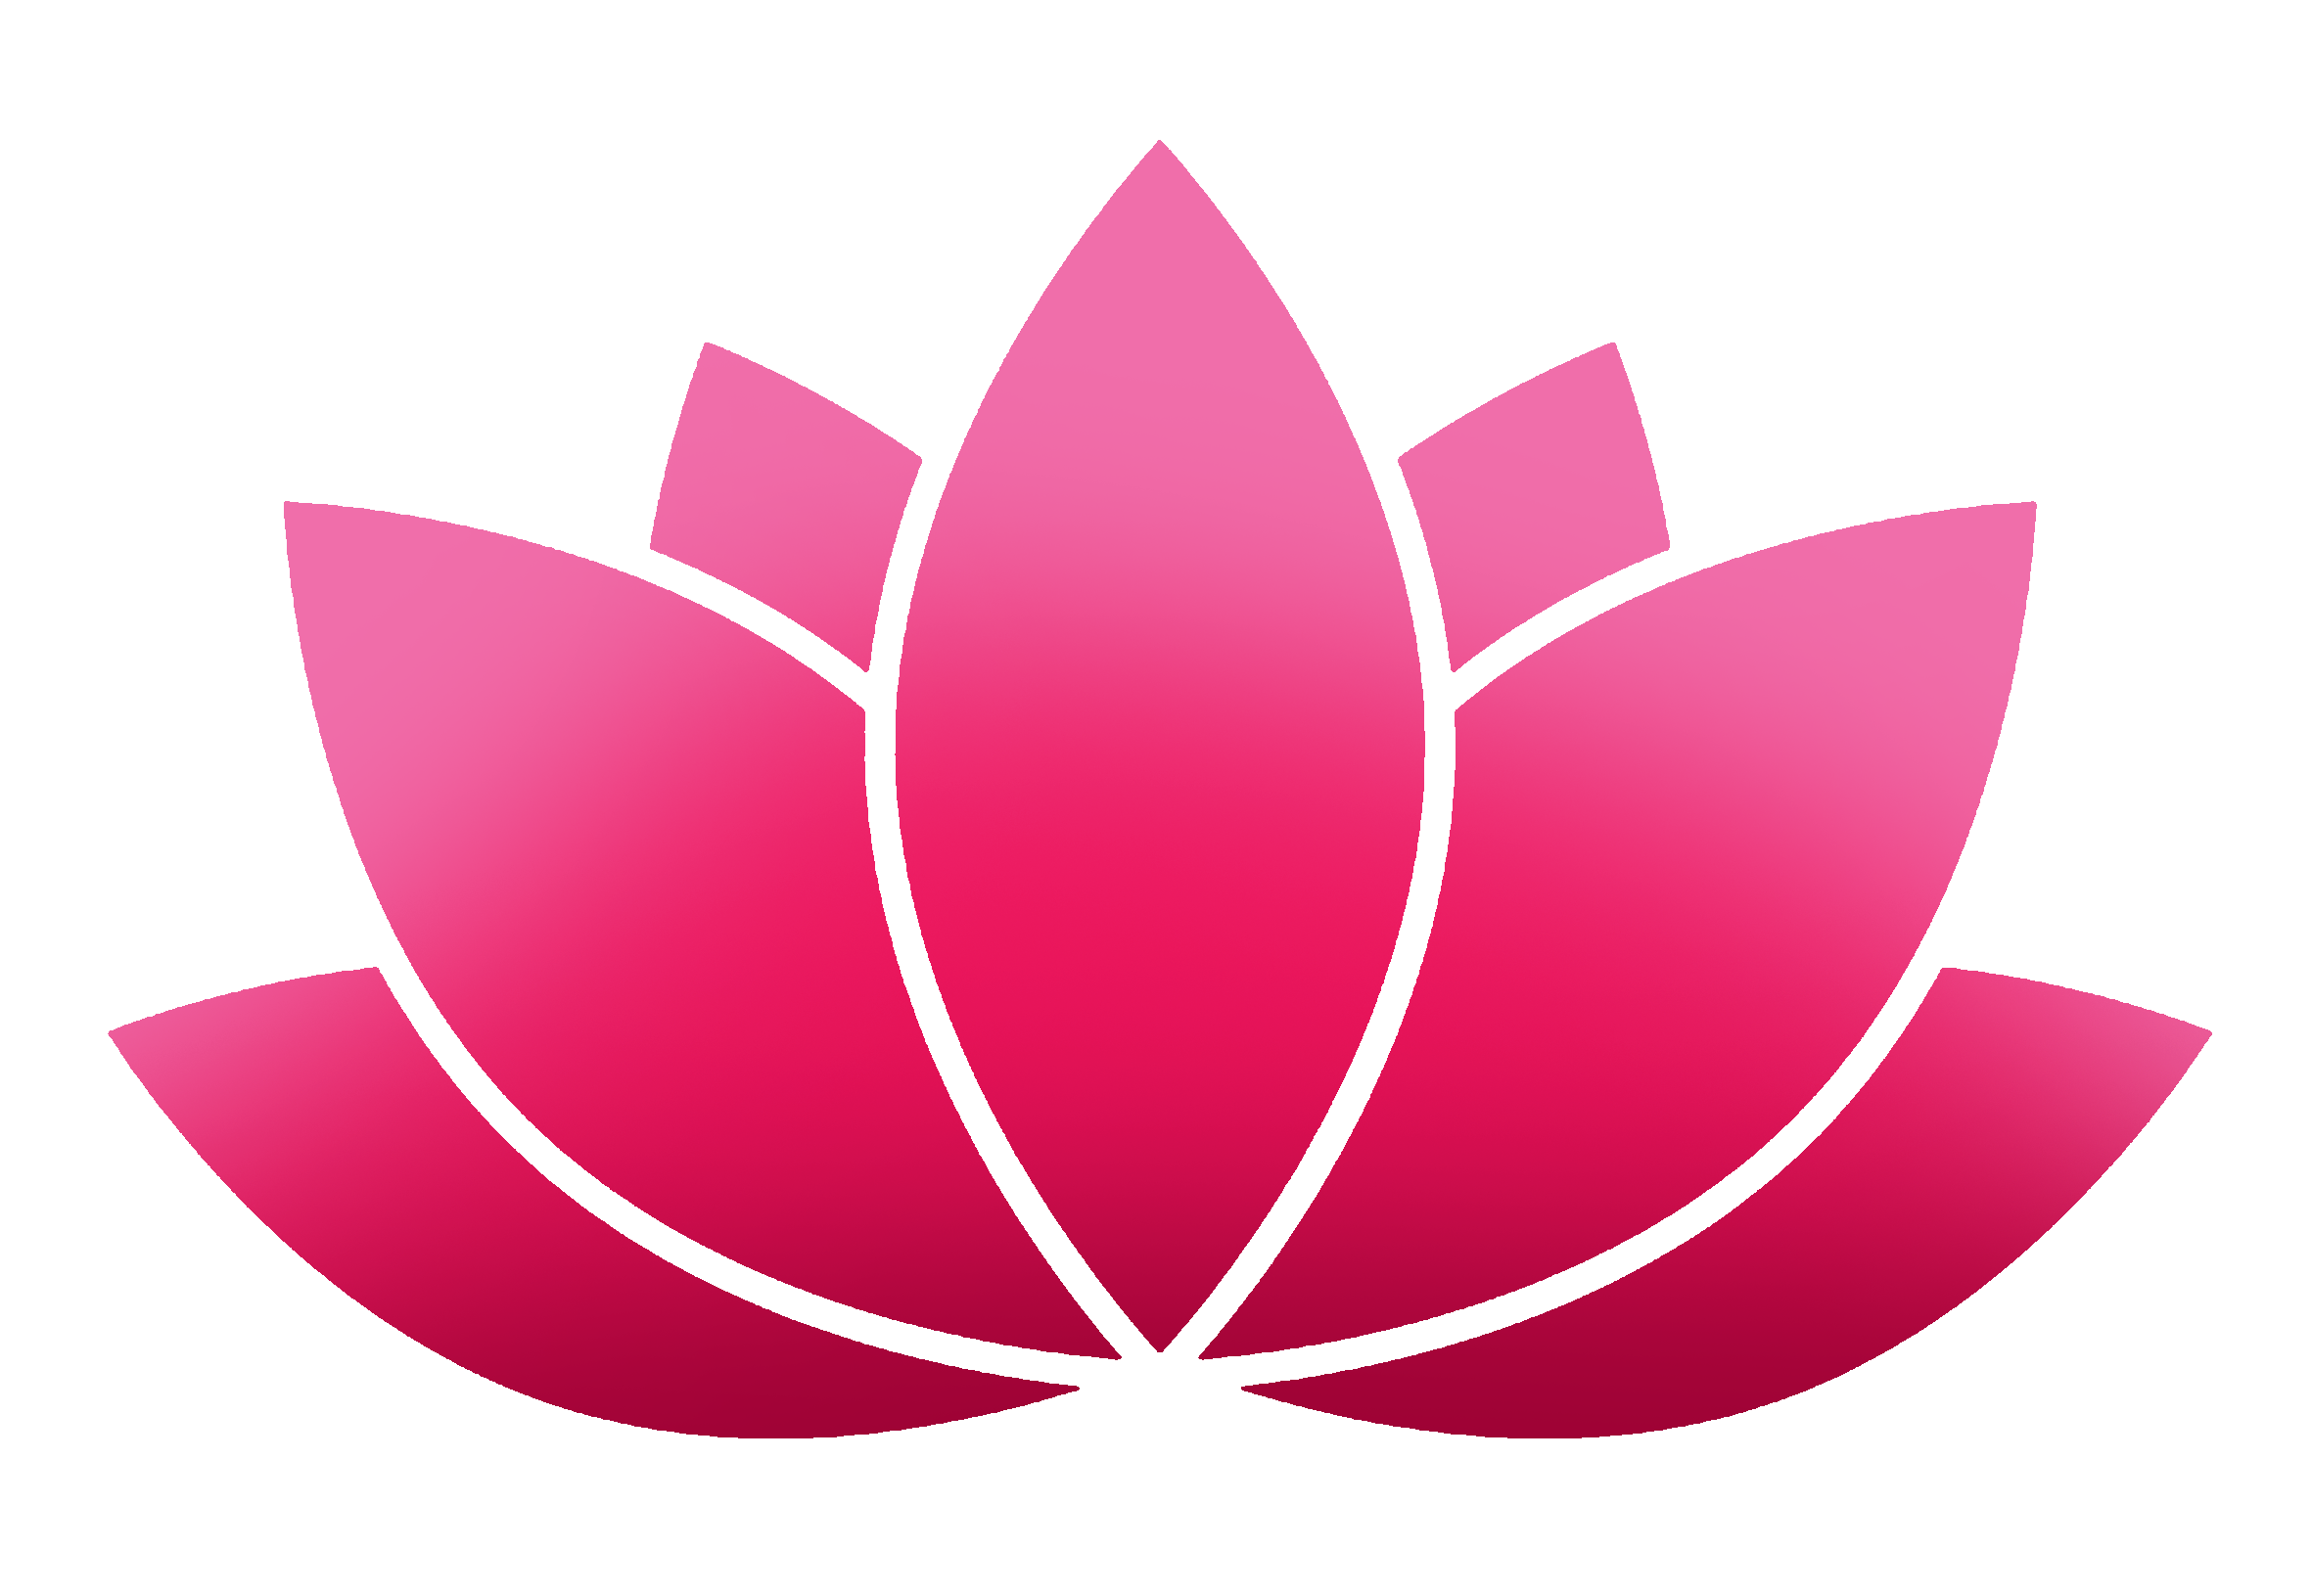 Lotus silhouette clipart PNG